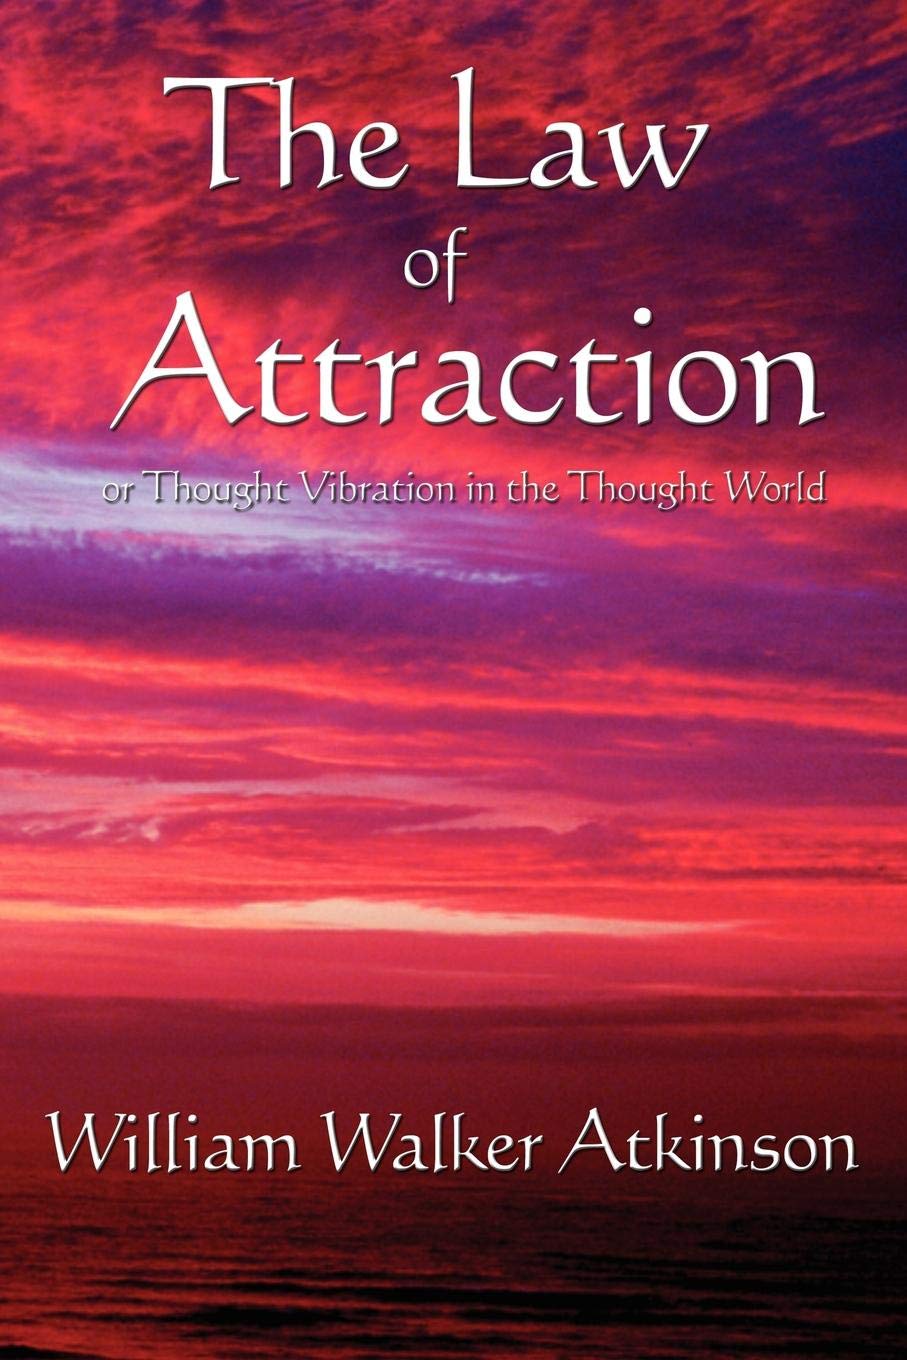 Thought Vibration, or The Law of Attraction in the Thought